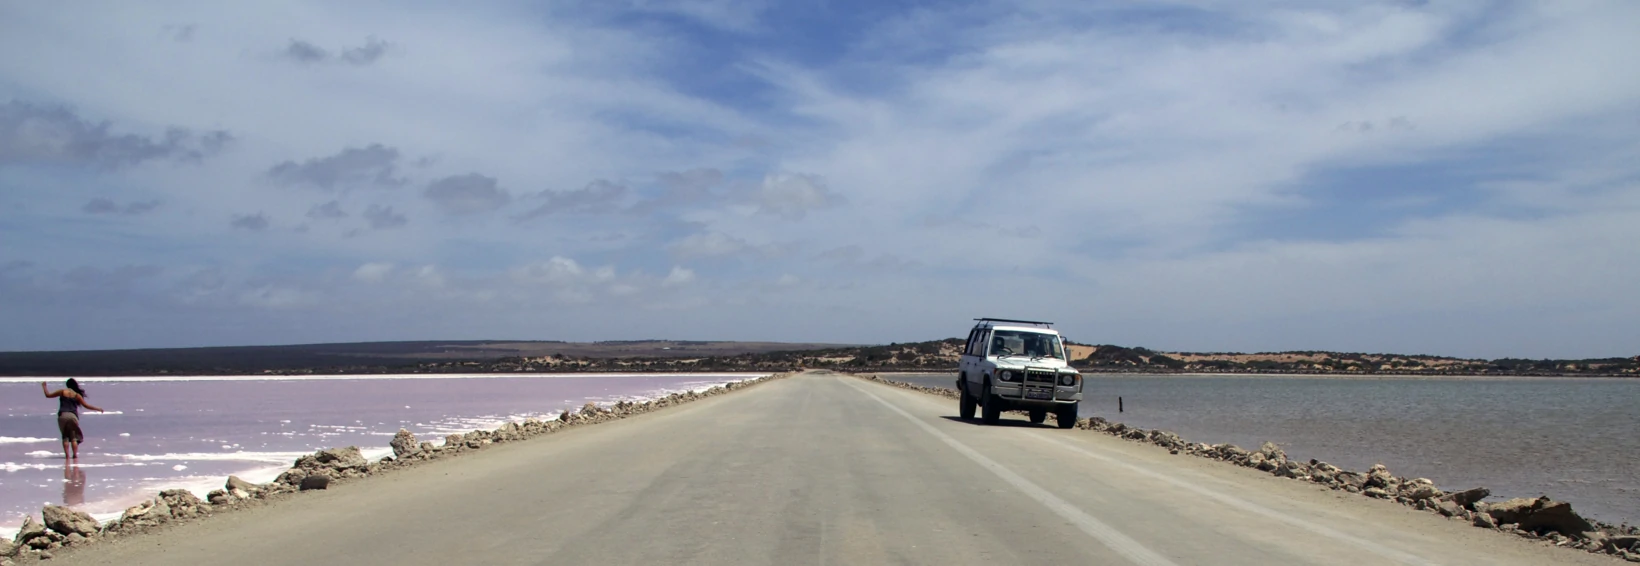 Dirt road with a single parked jeep on it. It divides two bodies of water, the one on the left is pink a woman is walking in it.